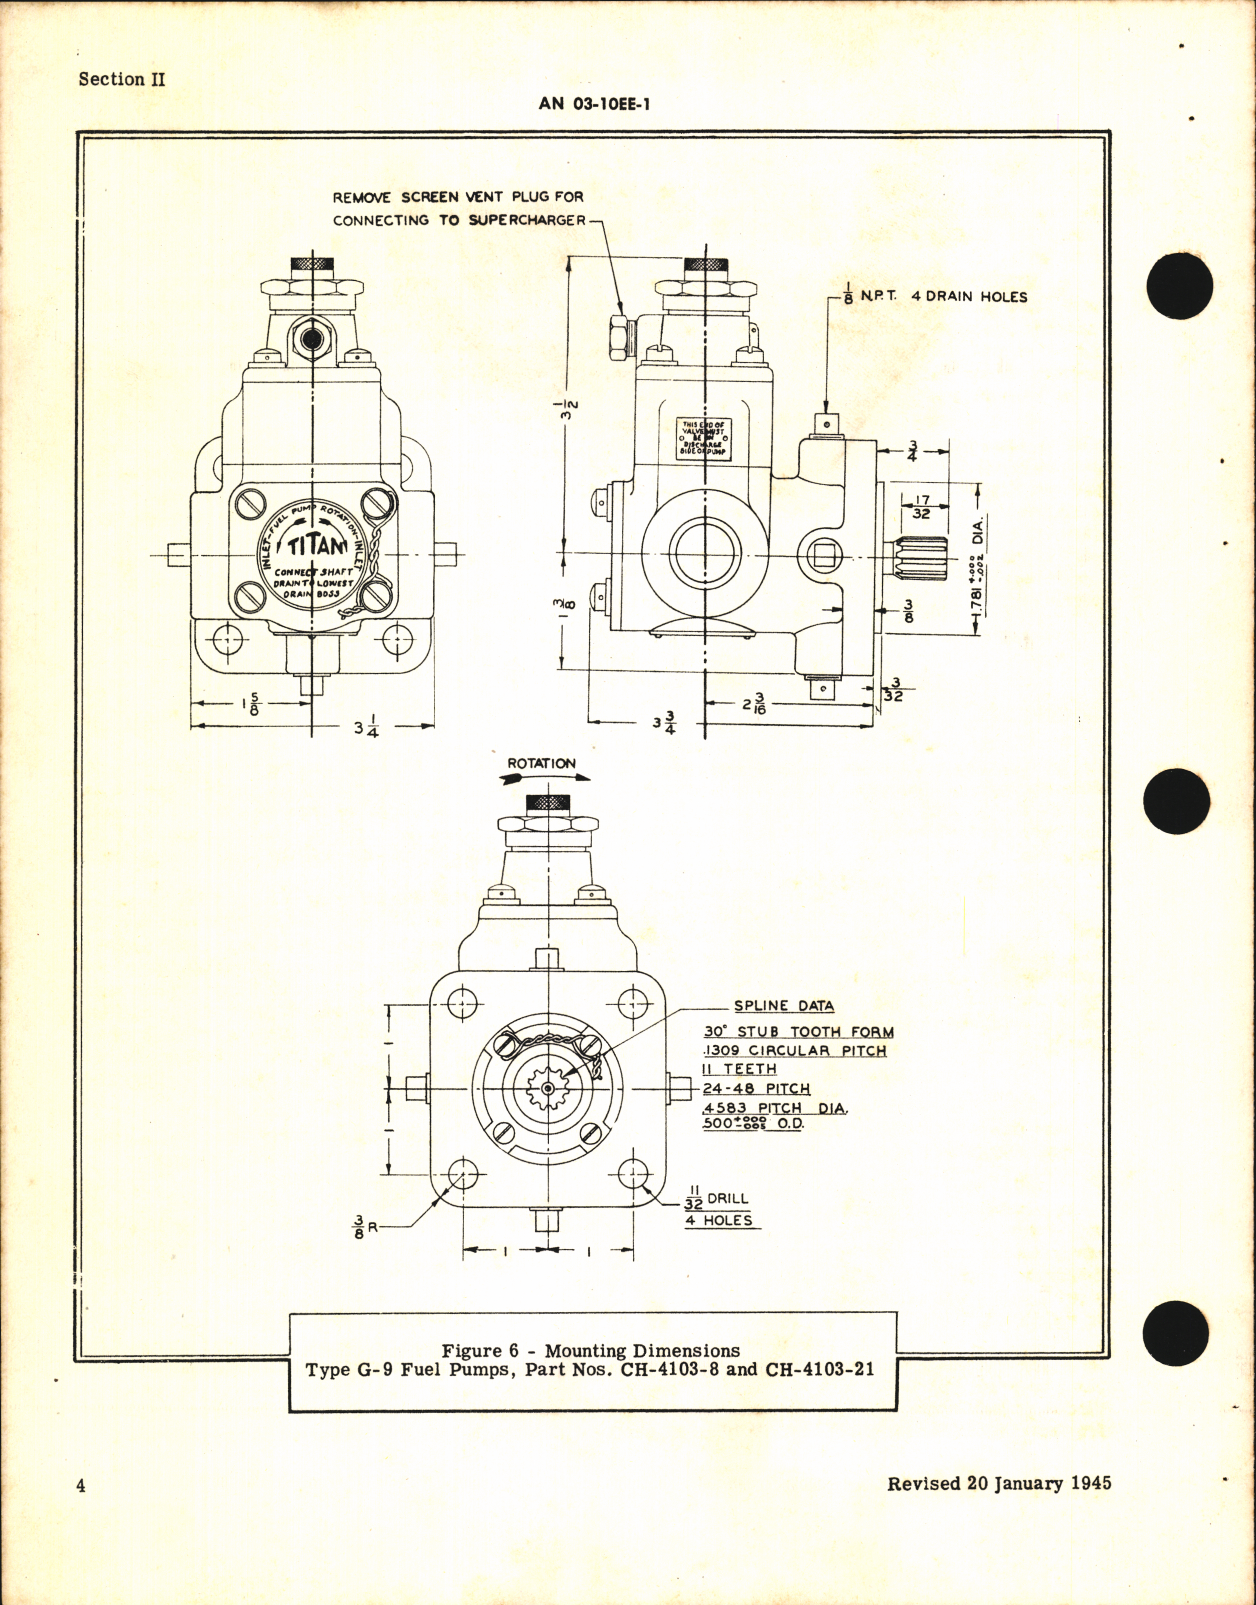 Sample page 8 from AirCorps Library document: Operation, Service, & Overhaul Inst w/ Parts Catalog for Engine-Driven Fuel Pumps